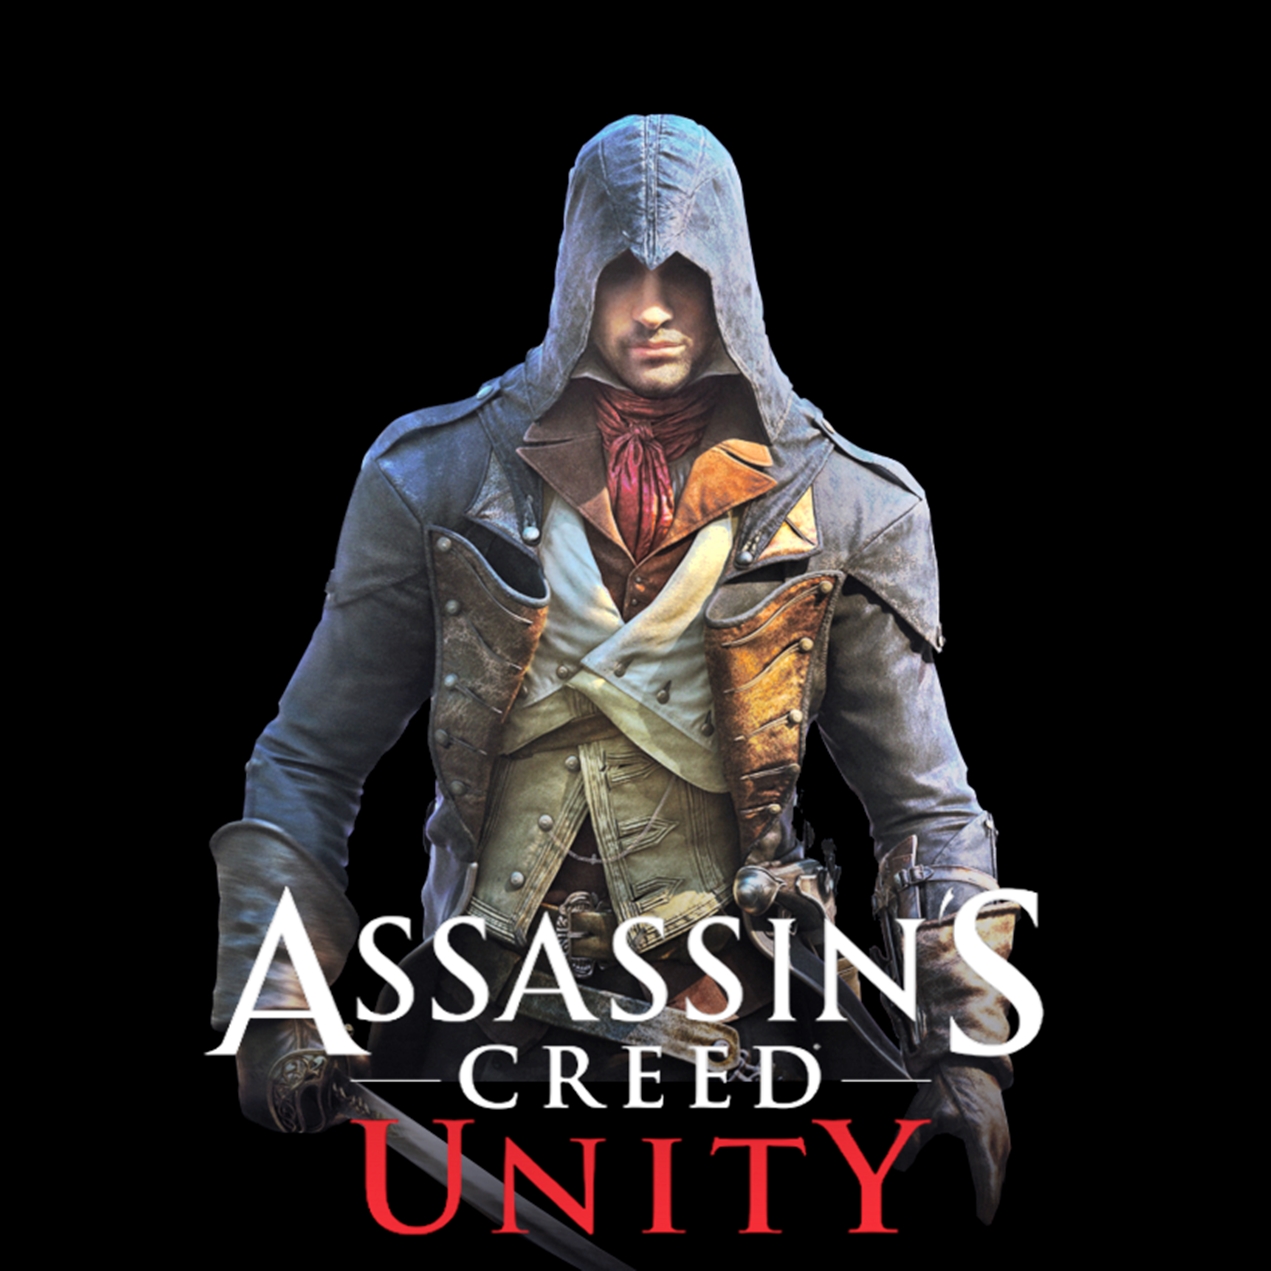 Assassins Creed Unity Free Download | Ocean Of Games